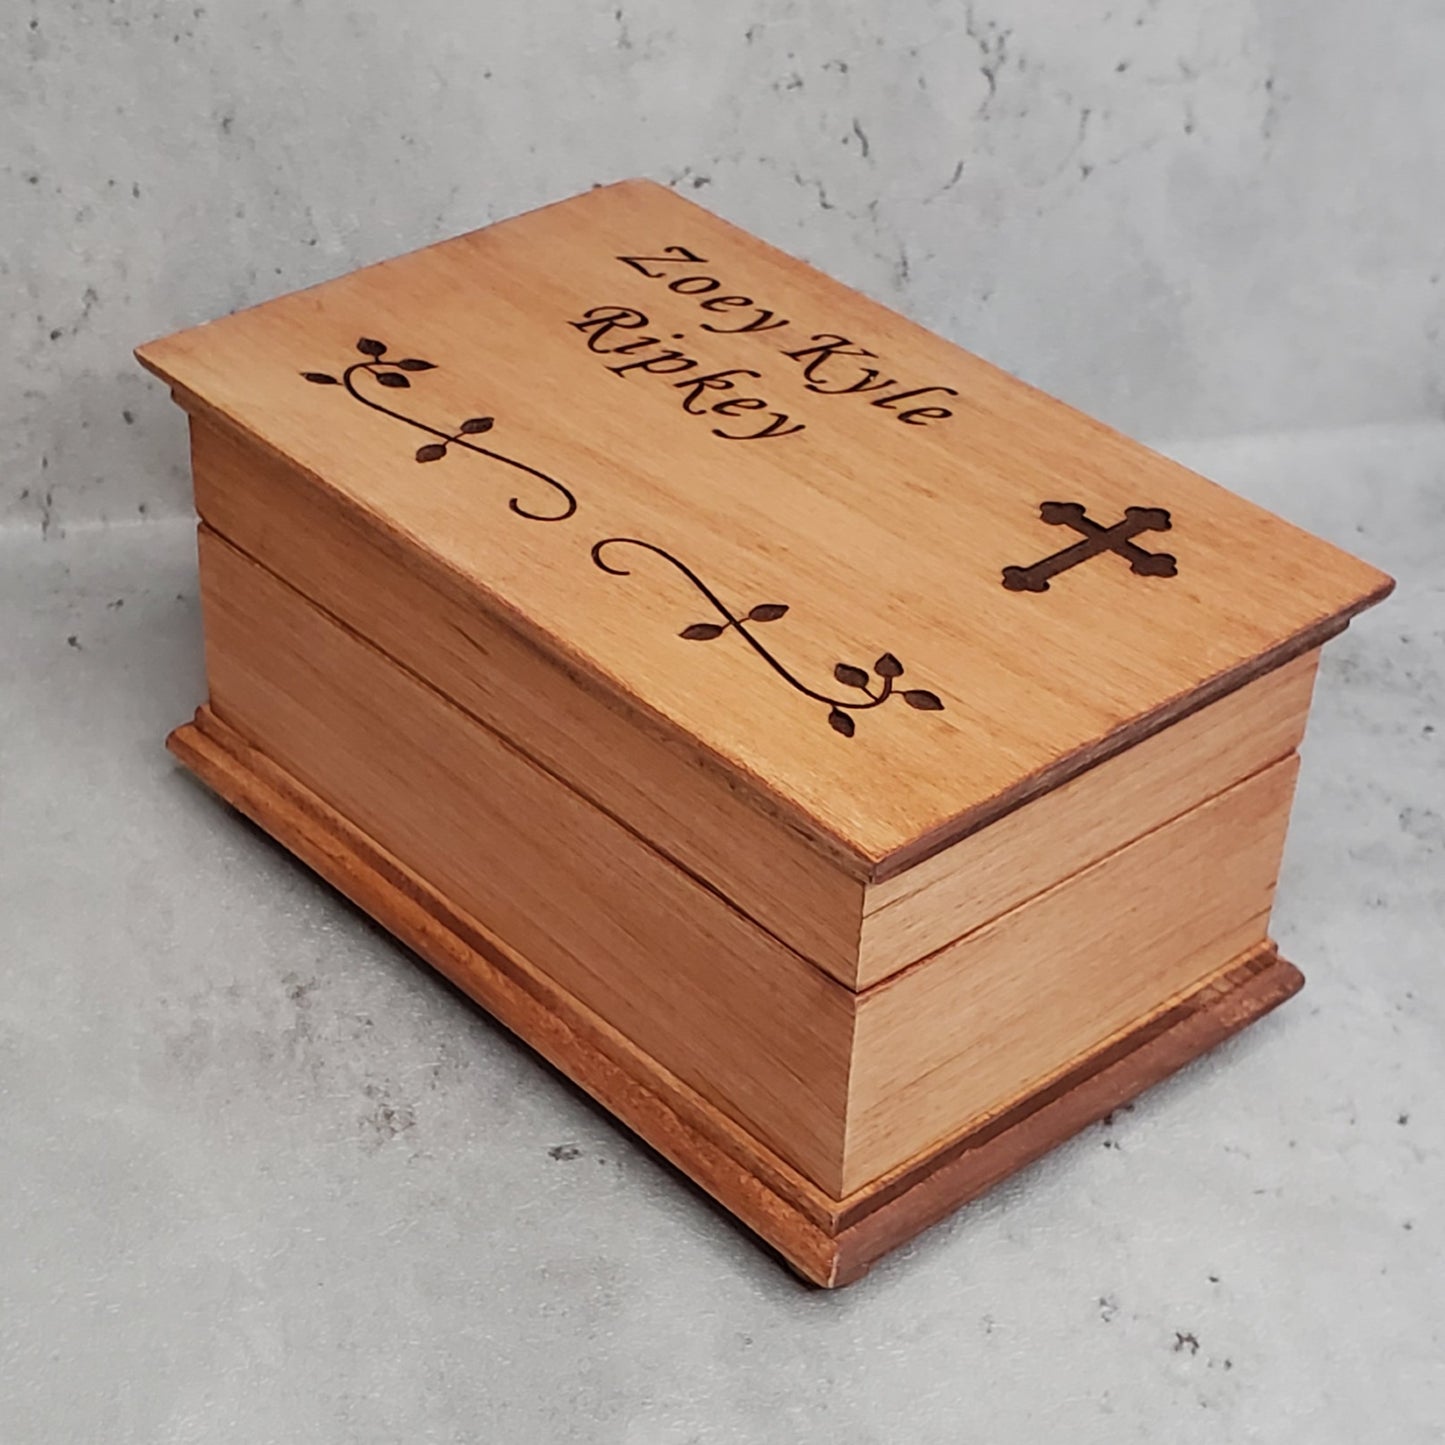 Christening box with name and cross on top with built in music player